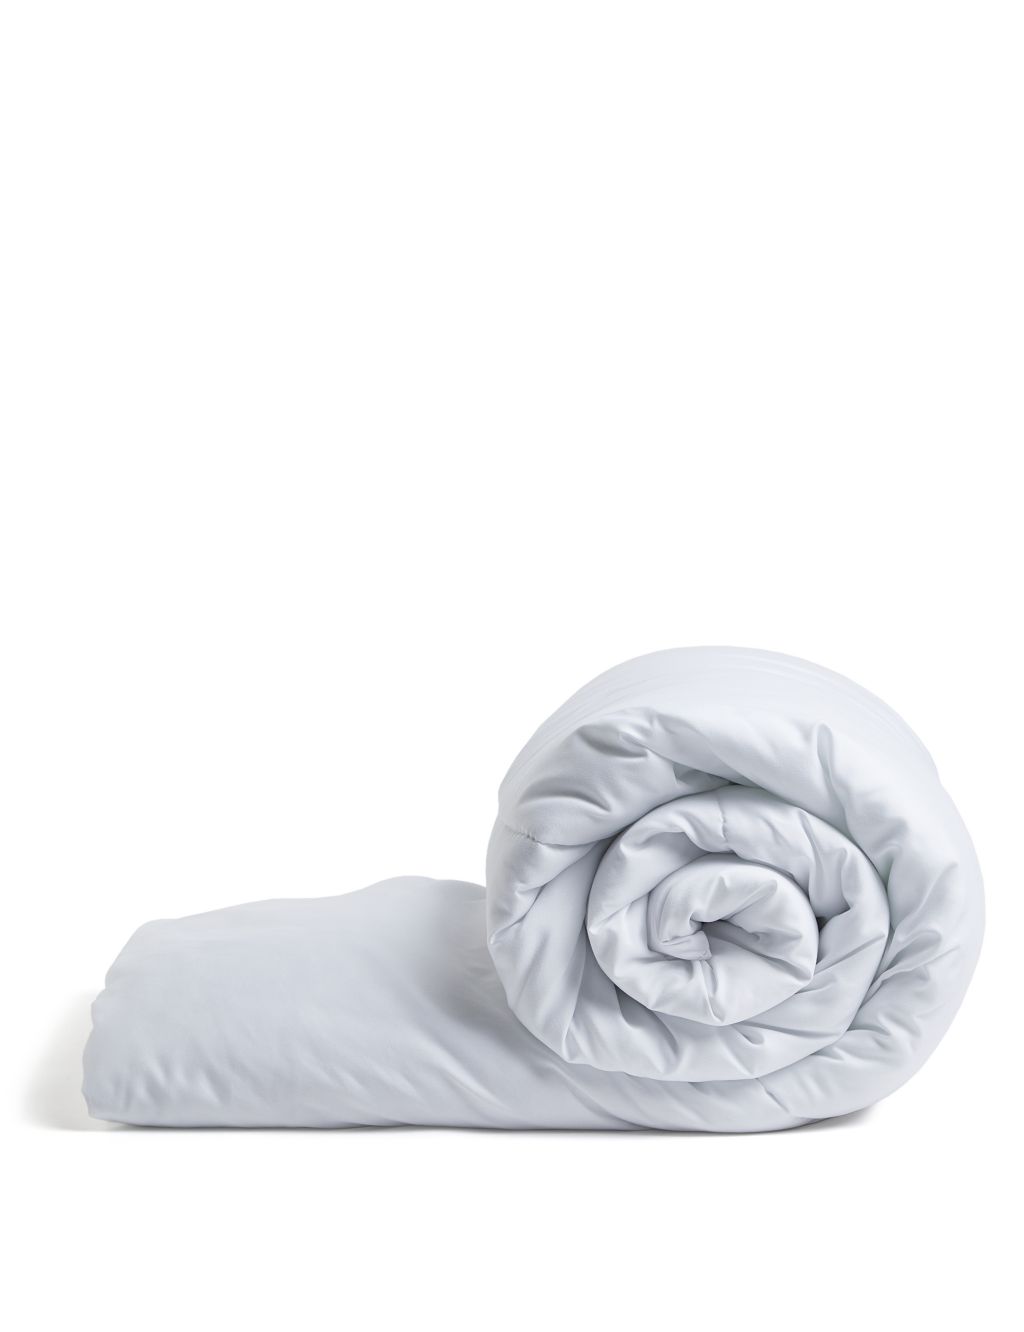 Simply Protect 4.5 Tog Duvet image 4